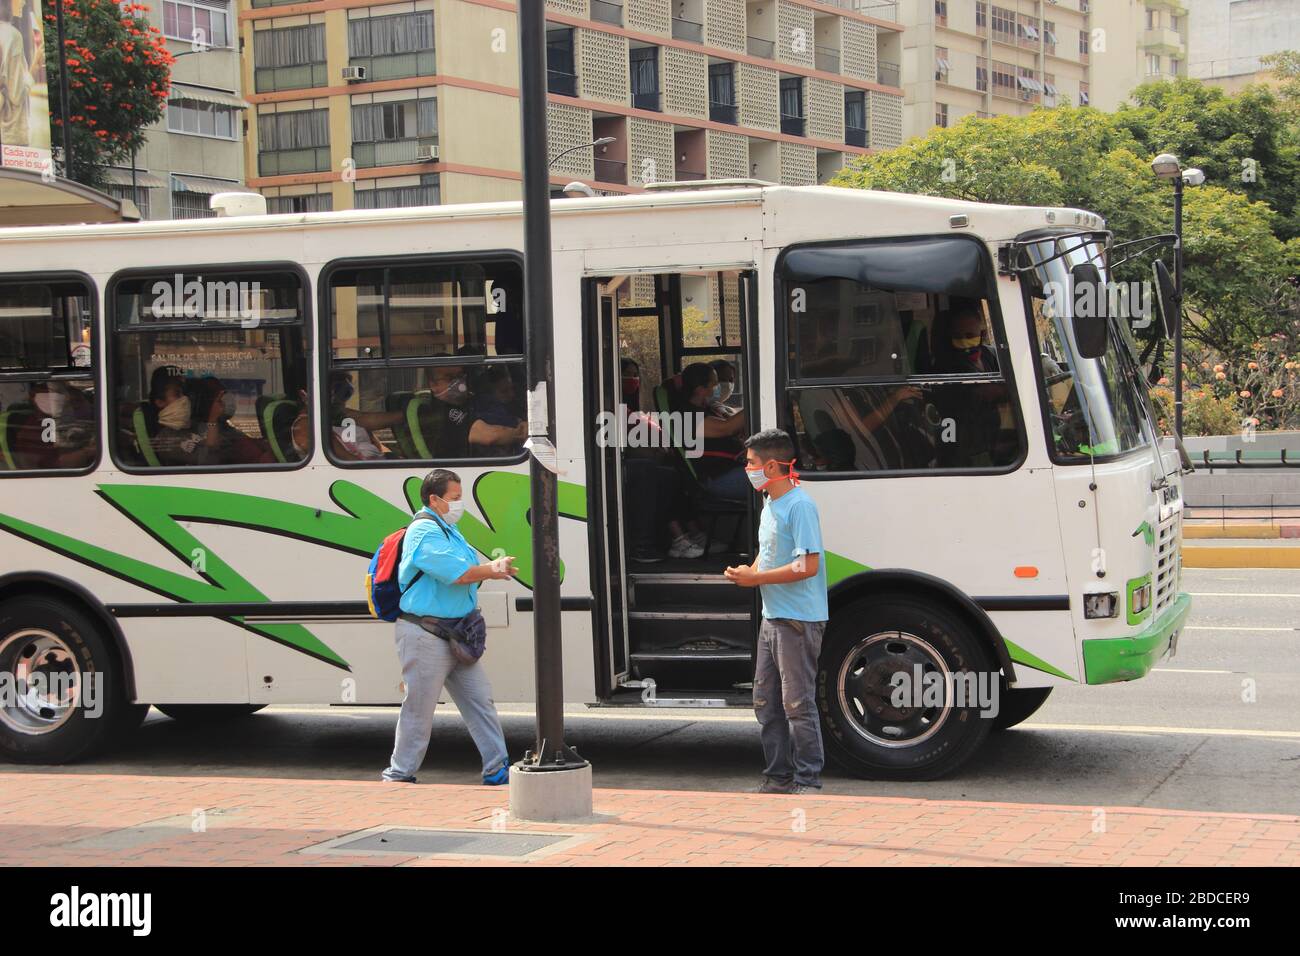 Caracas, Venezuela March 31, 2020: Caracas residents asked to wear mask and gloves in public transportation during the coronavirus (COVID-19) outbreak Stock Photo